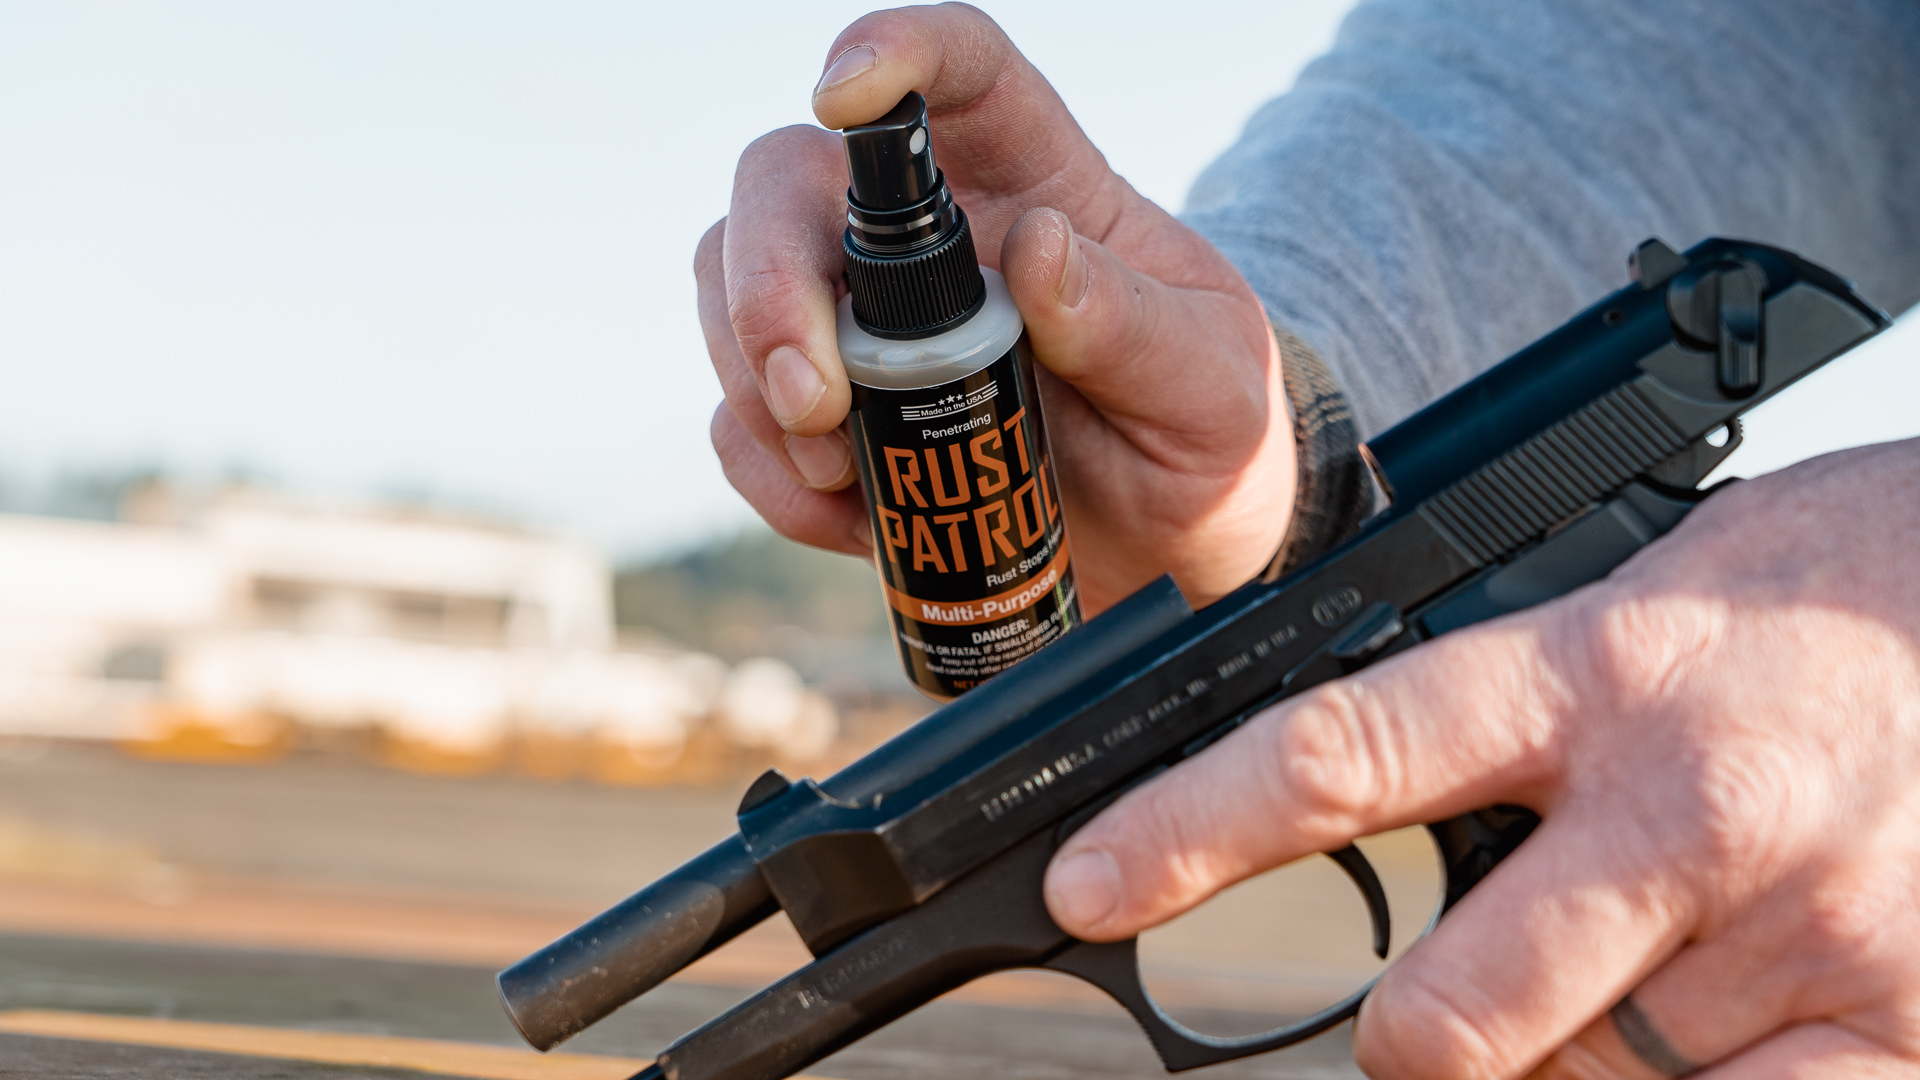 Spraying a bottle of 2 ounce Rust Patrol into the chamber of a pistol.